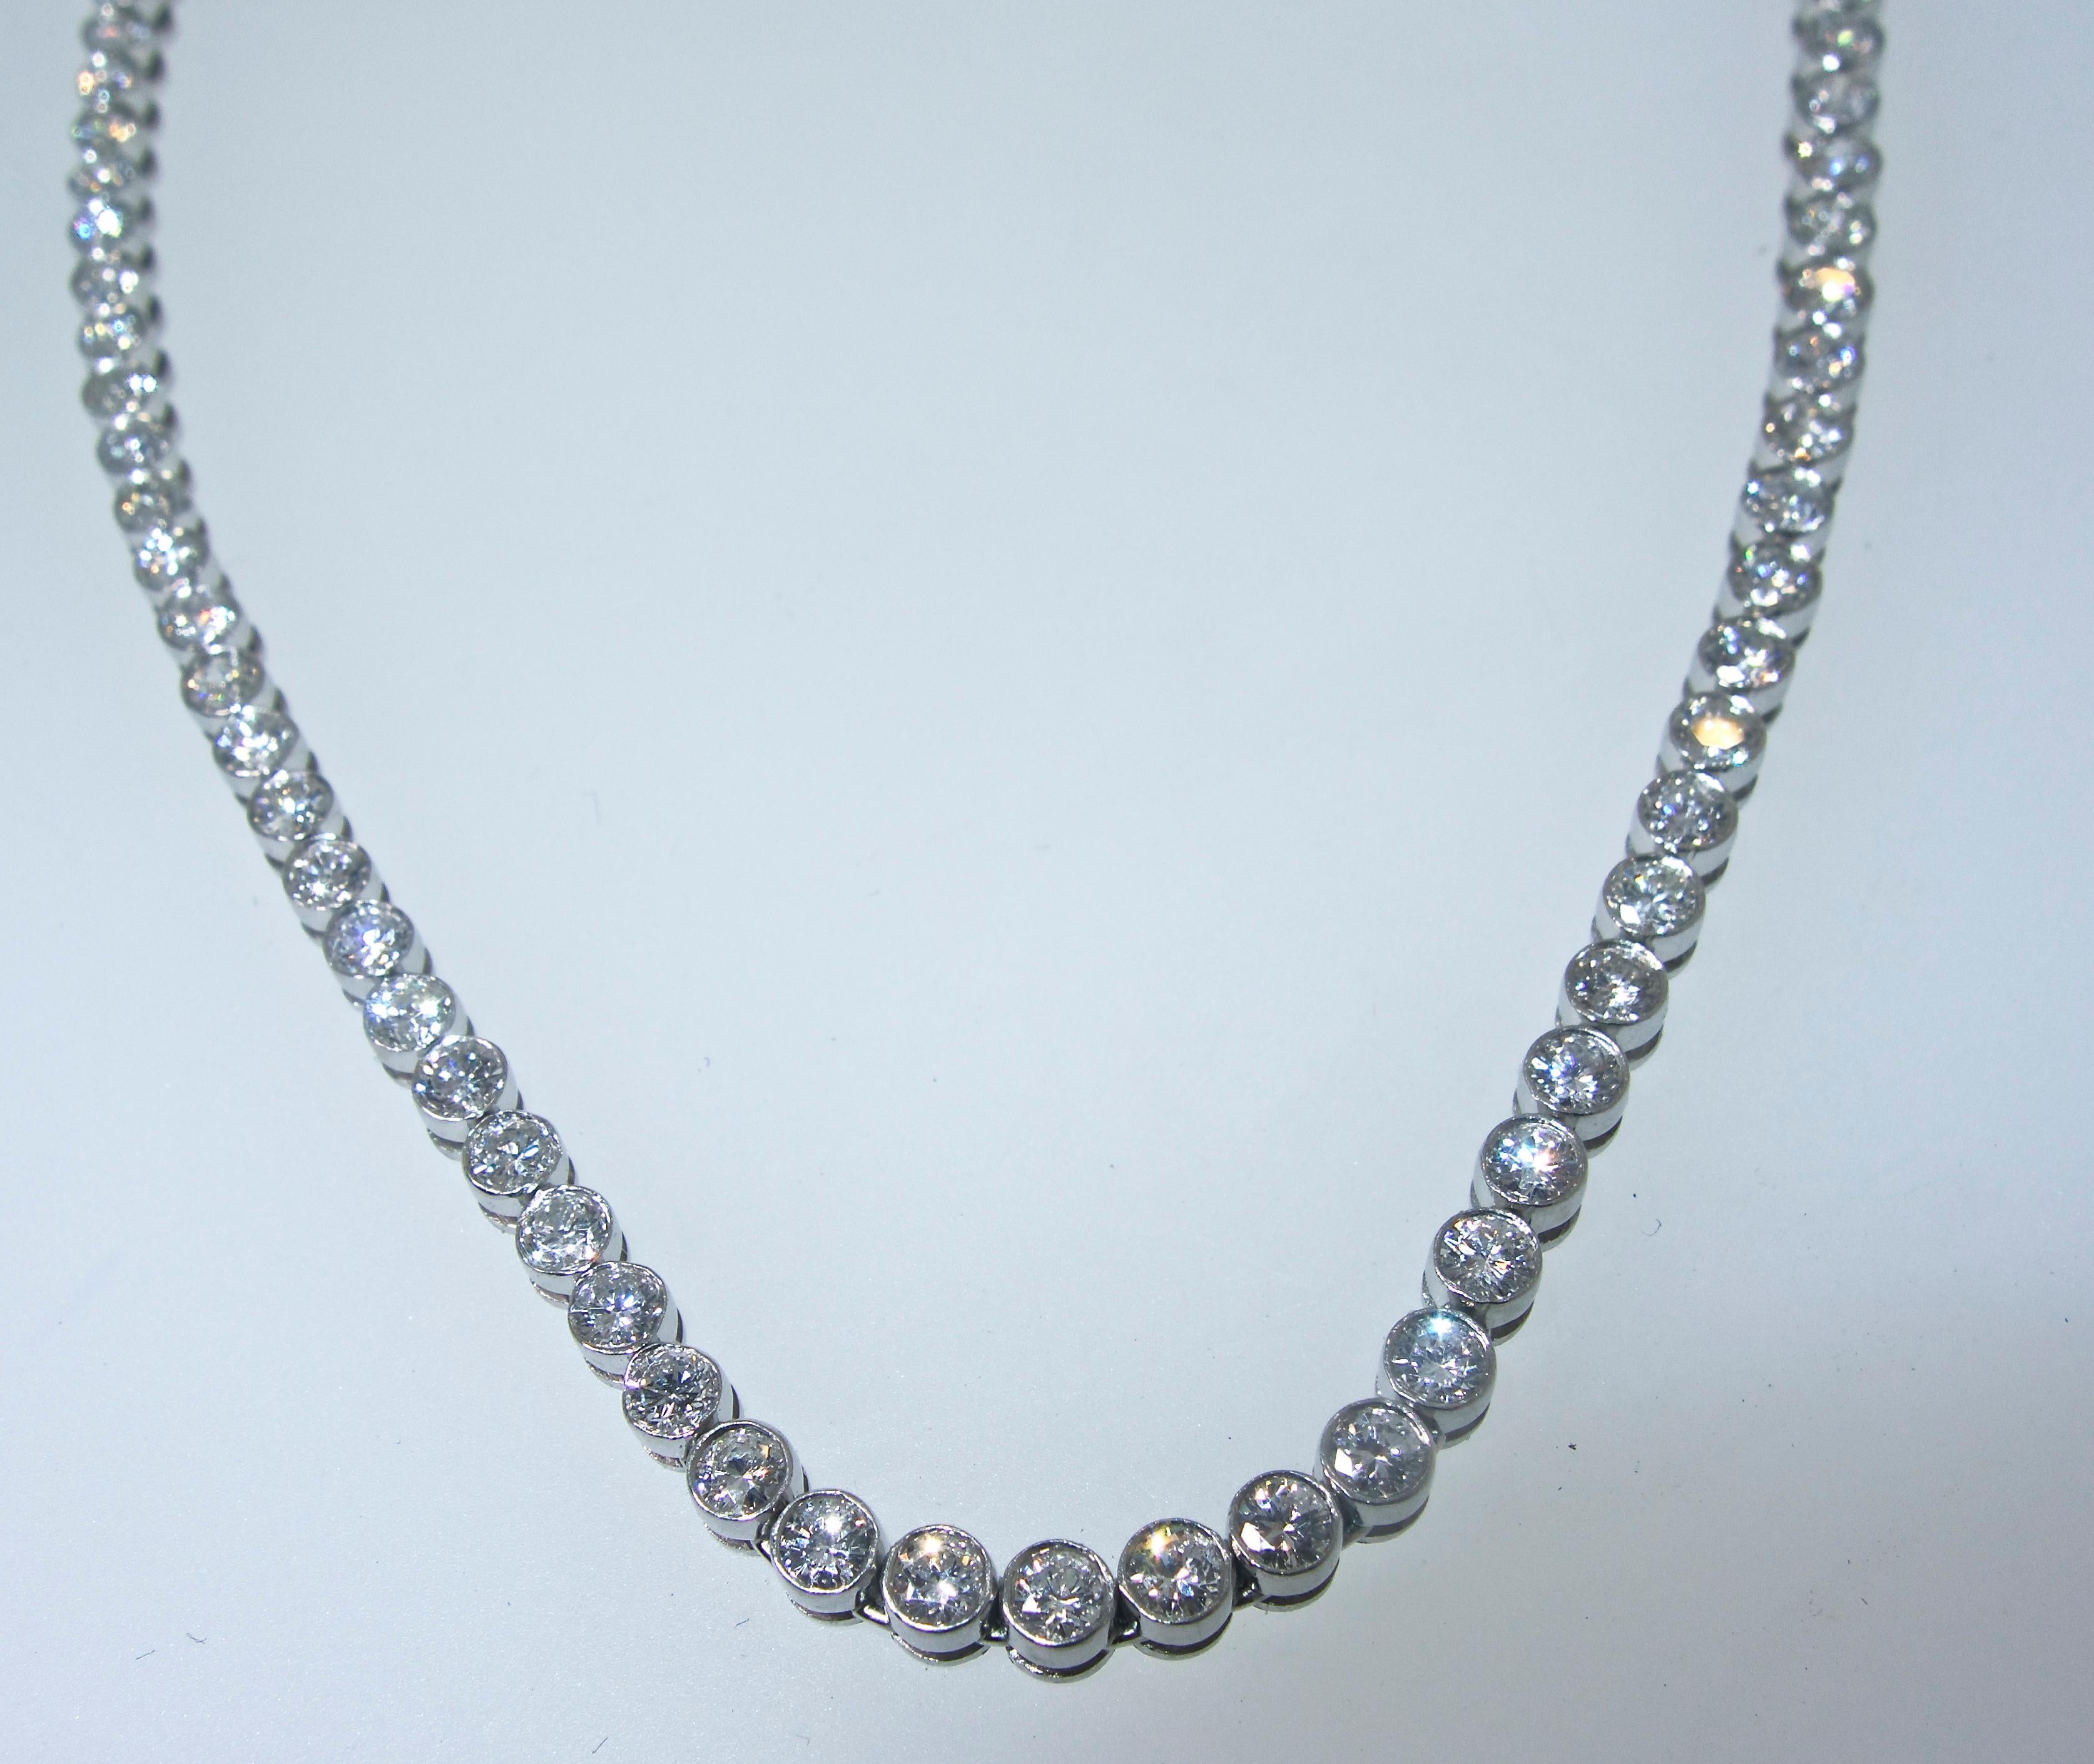 Diamond necklace with fine white brilliant cut diamonds. This well made necklace is platinum.  The diamonds slightly graduate in size from the largest at the center then graduating in size with the smallest stones at the clasp.   The total diamond